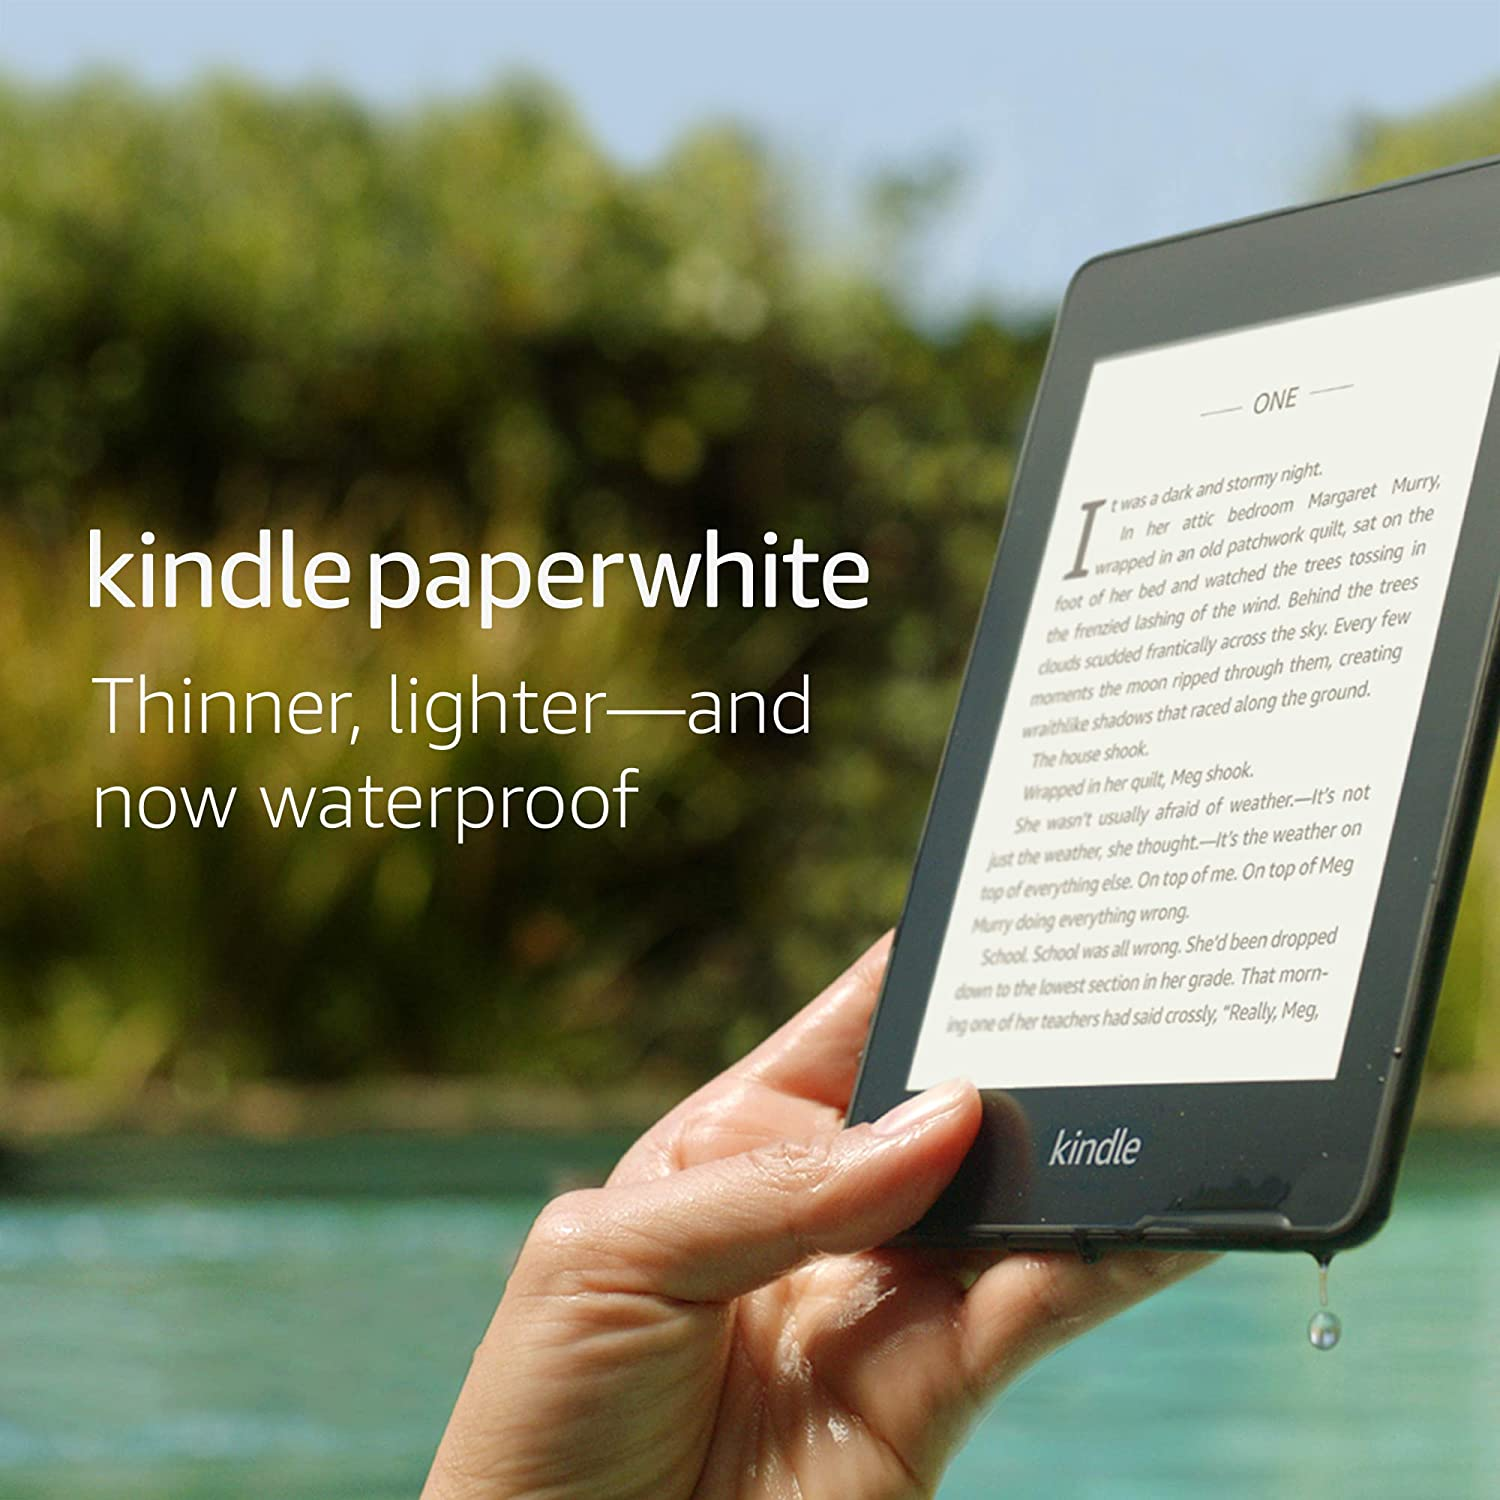 O8K6Dcyf Amazon &Lt;Ul&Gt; &Lt;Li&Gt;10Th Generation Now Available In Twilight Blue&Lt;/Li&Gt; &Lt;Li&Gt;The Thinnest, Lightest Kindle Paperwhite Yet—With A Flush-Front Design And 300 Ppi Glare-Free Display That Reads Like Real Paper Even In Bright Sunlight.&Lt;/Li&Gt; &Lt;Li&Gt;Now Waterproof, So You’re Free To Read And Relax At The Beach, By The Pool, Or In The Bath.&Lt;/Li&Gt; &Lt;Li&Gt;Enjoy Twice The Storage With 8 Gb To Hold More Magazines, Comics, And Audiobooks.&Lt;/Li&Gt; &Lt;Li&Gt;Now With Audible. Pair With Bluetooth Headphones Or Speakers To Listen To Your Story.&Lt;/Li&Gt; &Lt;Li&Gt;A Single Battery Charge Lasts Weeks, Not Hours.&Lt;/Li&Gt; &Lt;Li&Gt;The Built-In Adjustable Light Lets You Read Indoors And Outdoors, Day And Night.&Lt;/Li&Gt; &Lt;Li&Gt;Get Instant Access To New Releases And Bestsellers, Plus Over A Million Titles&Lt;/Li&Gt; &Lt;/Ul&Gt; Amazon All New Kindle Paper White (10Th Gen) E-Reader– Waterproof 6&Quot;-8Gb- Twilight Blue